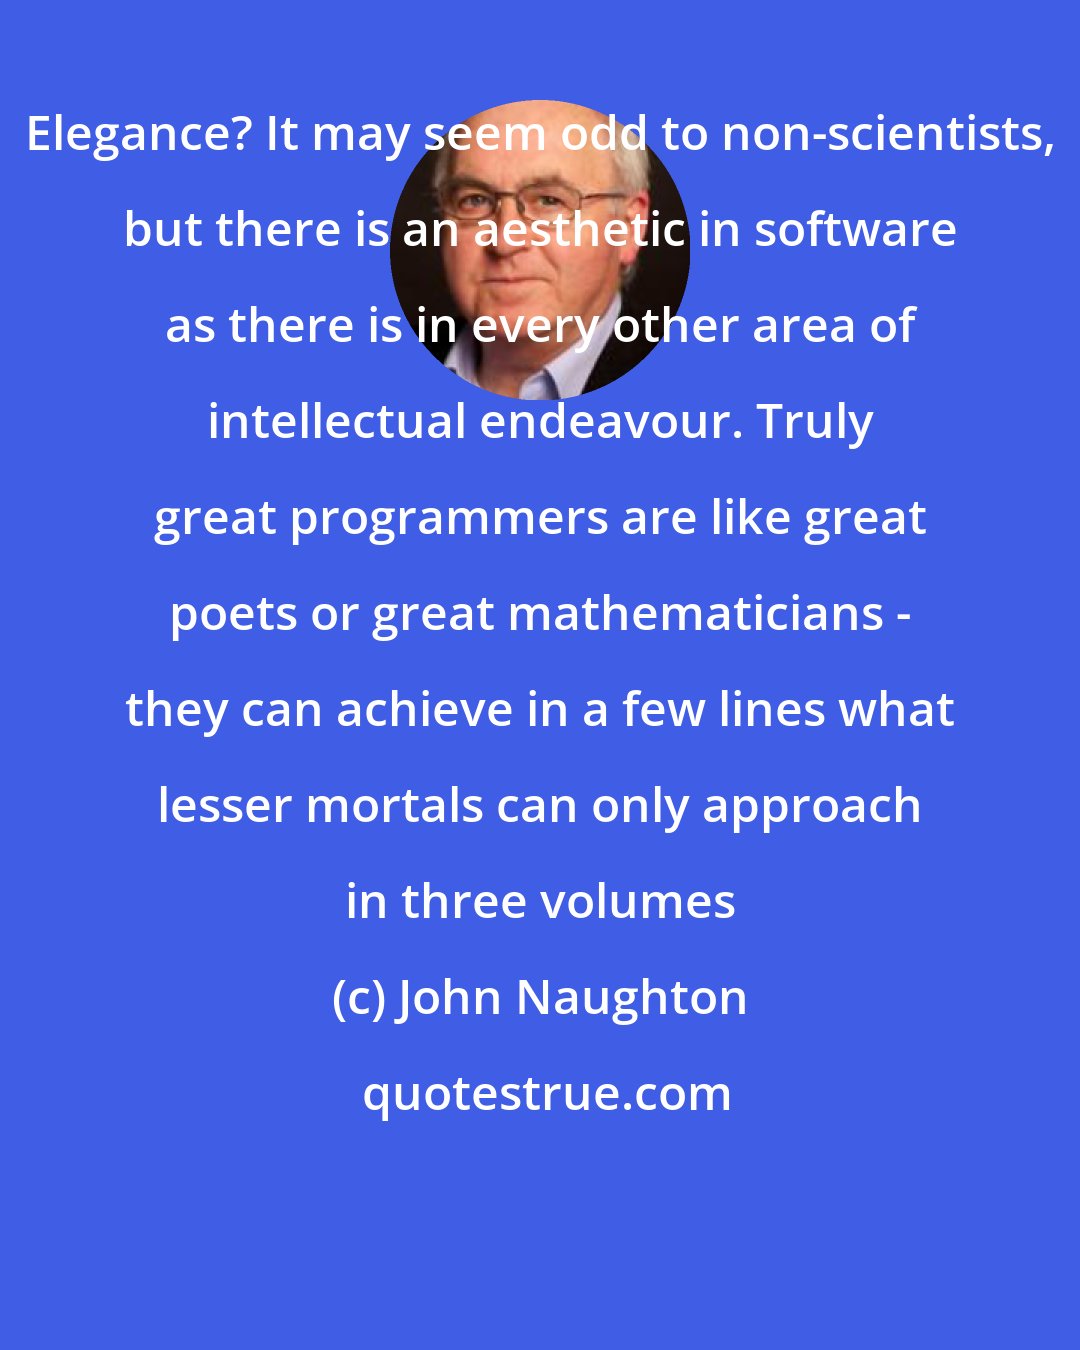 John Naughton: Elegance? It may seem odd to non-scientists, but there is an aesthetic in software as there is in every other area of intellectual endeavour. Truly great programmers are like great poets or great mathematicians - they can achieve in a few lines what lesser mortals can only approach in three volumes